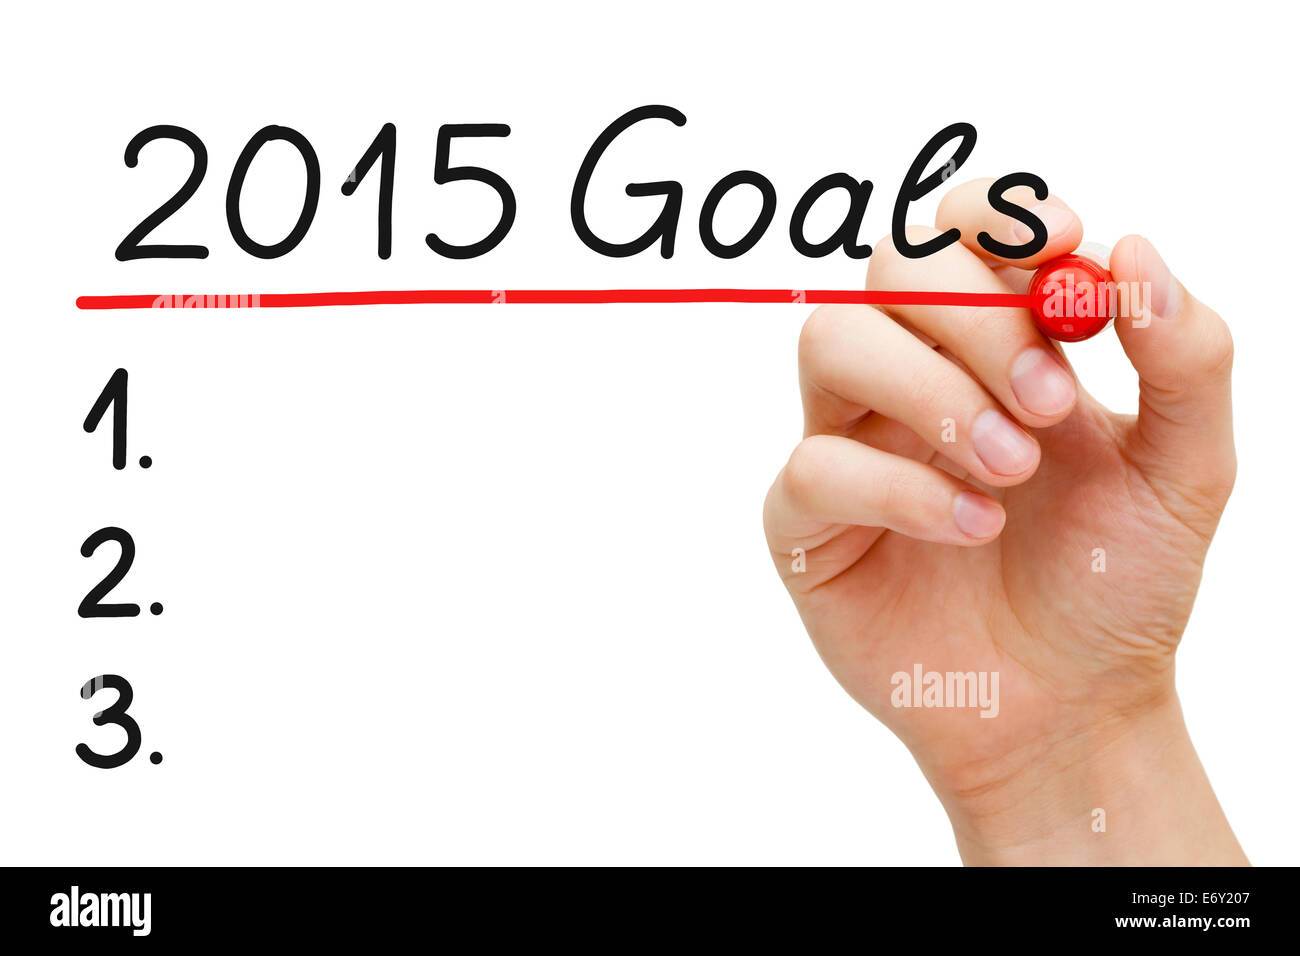 Hand underlining 2015 Goals with red marker isolated on white. Stock Photo